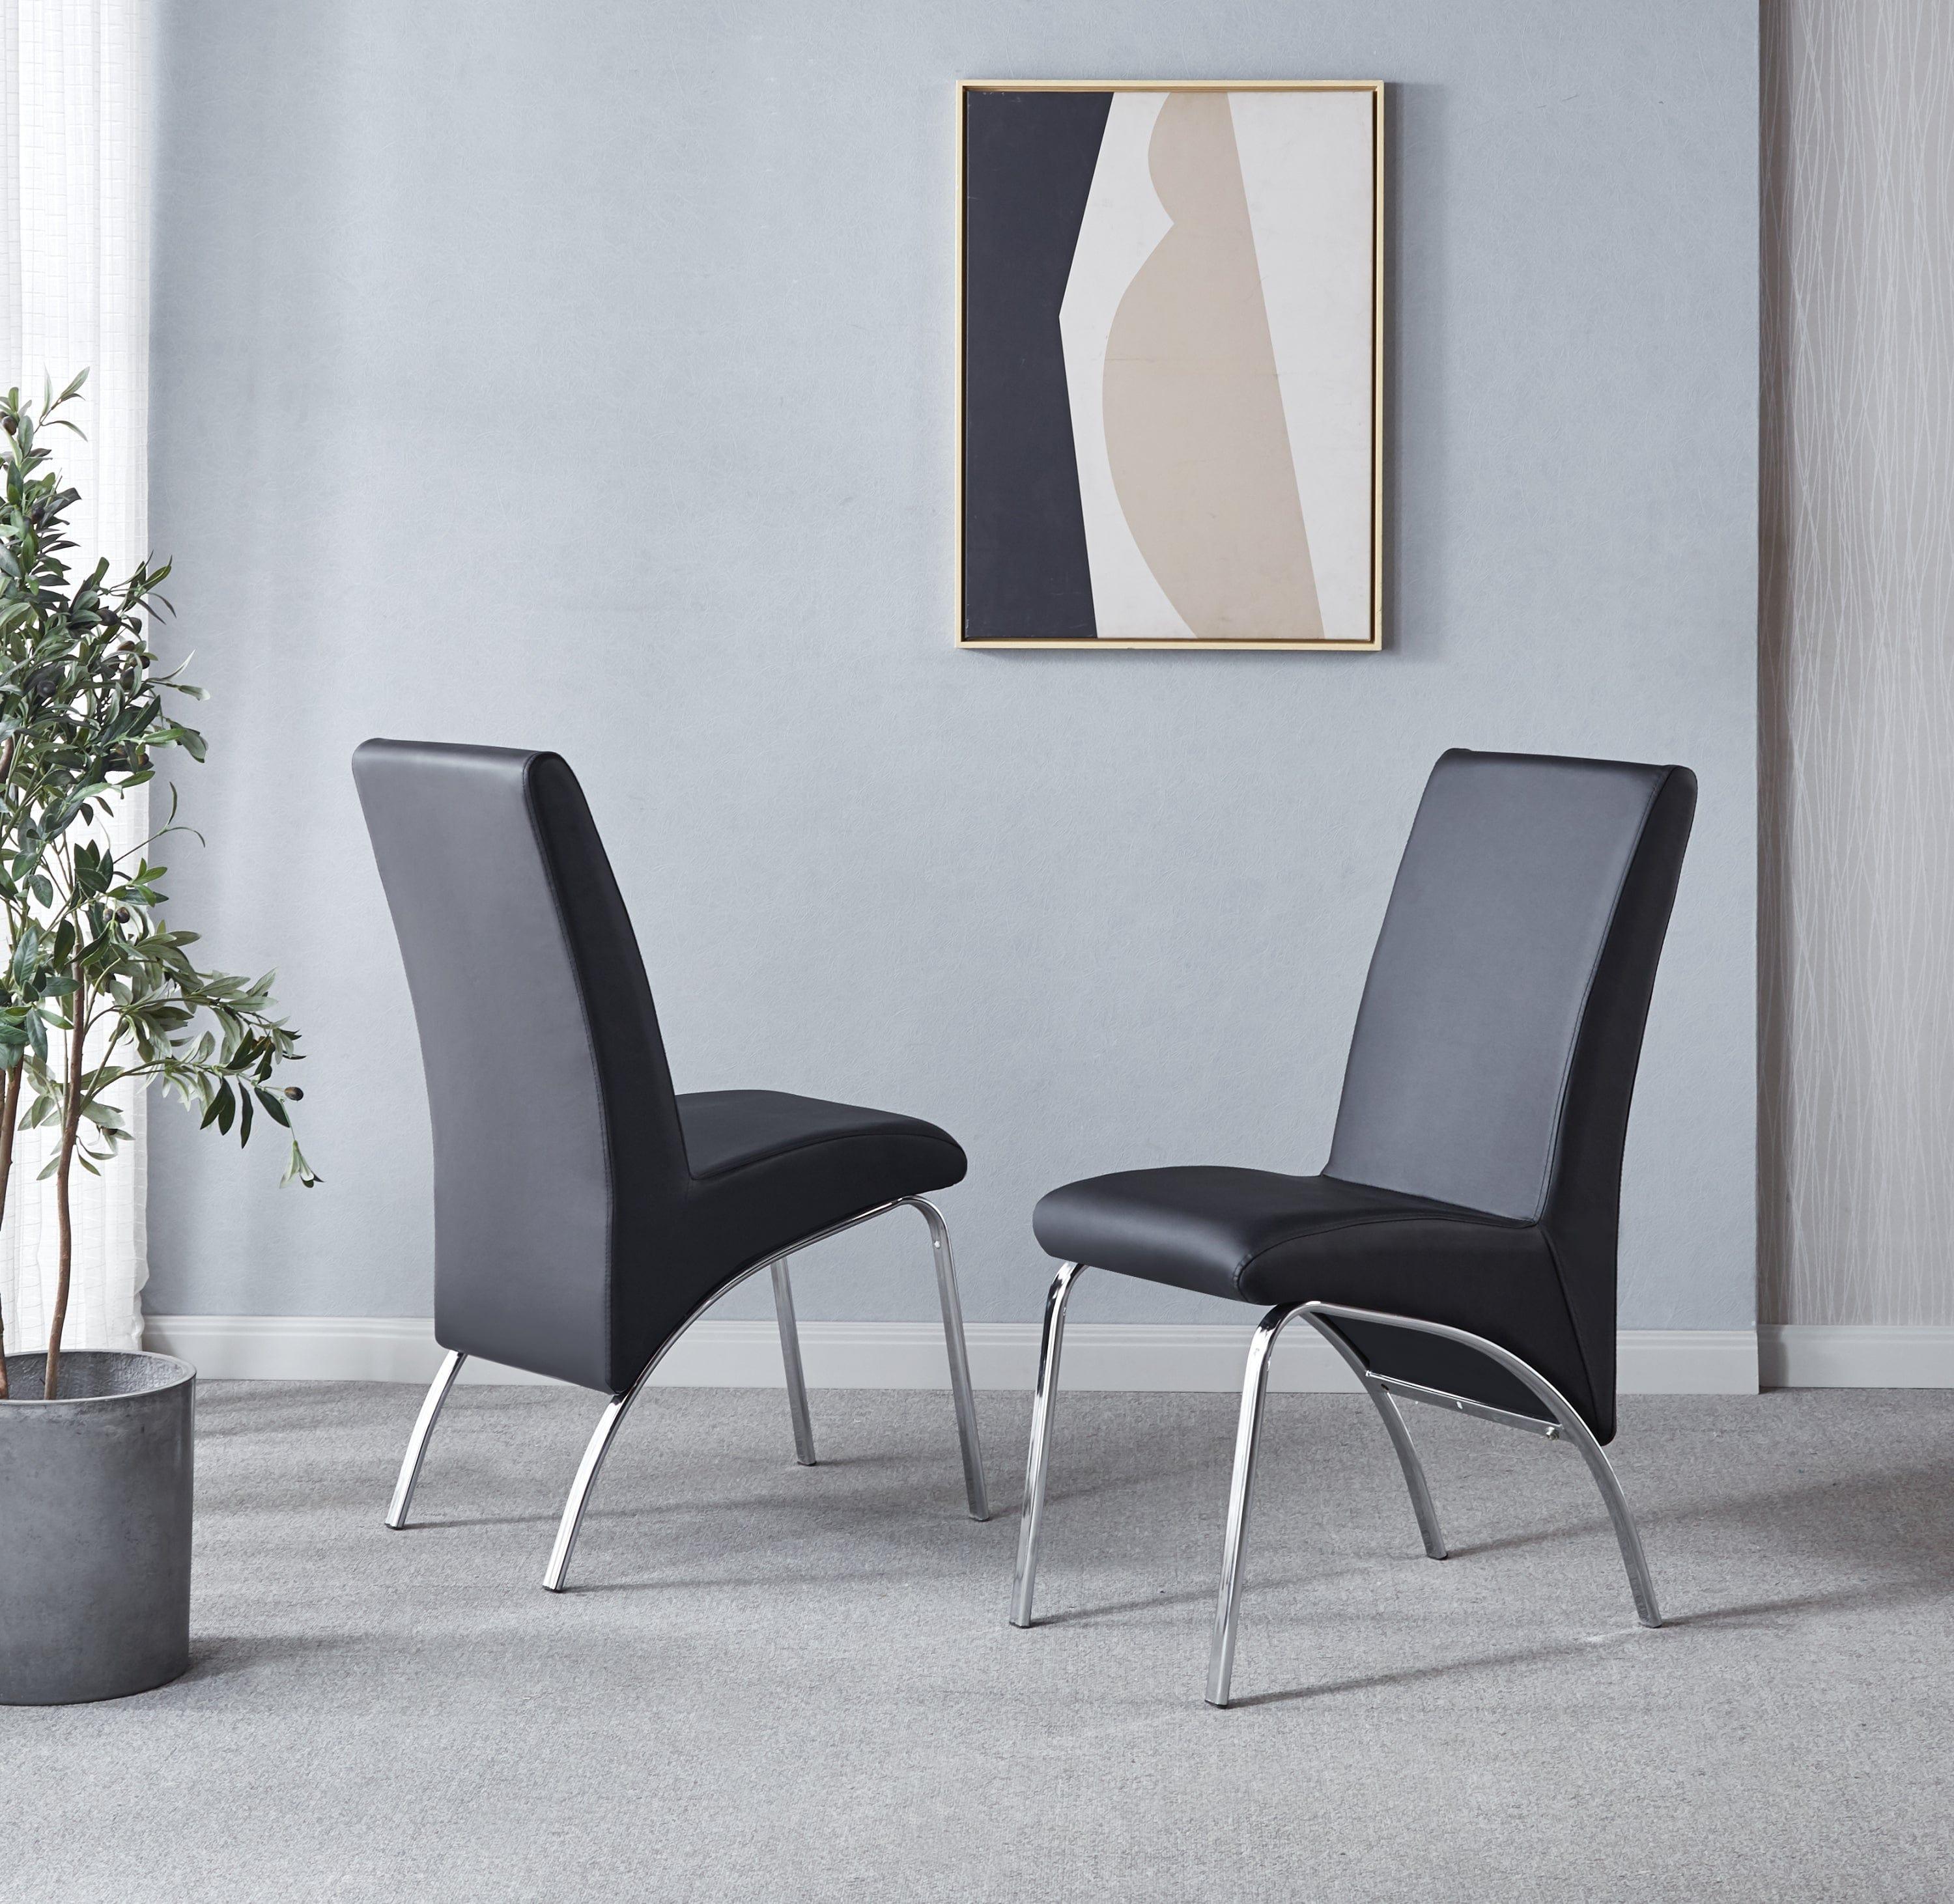 Shop Modern Leatherette Dining Chair with Silver Metal Legs Set of 2 Mademoiselle Home Decor